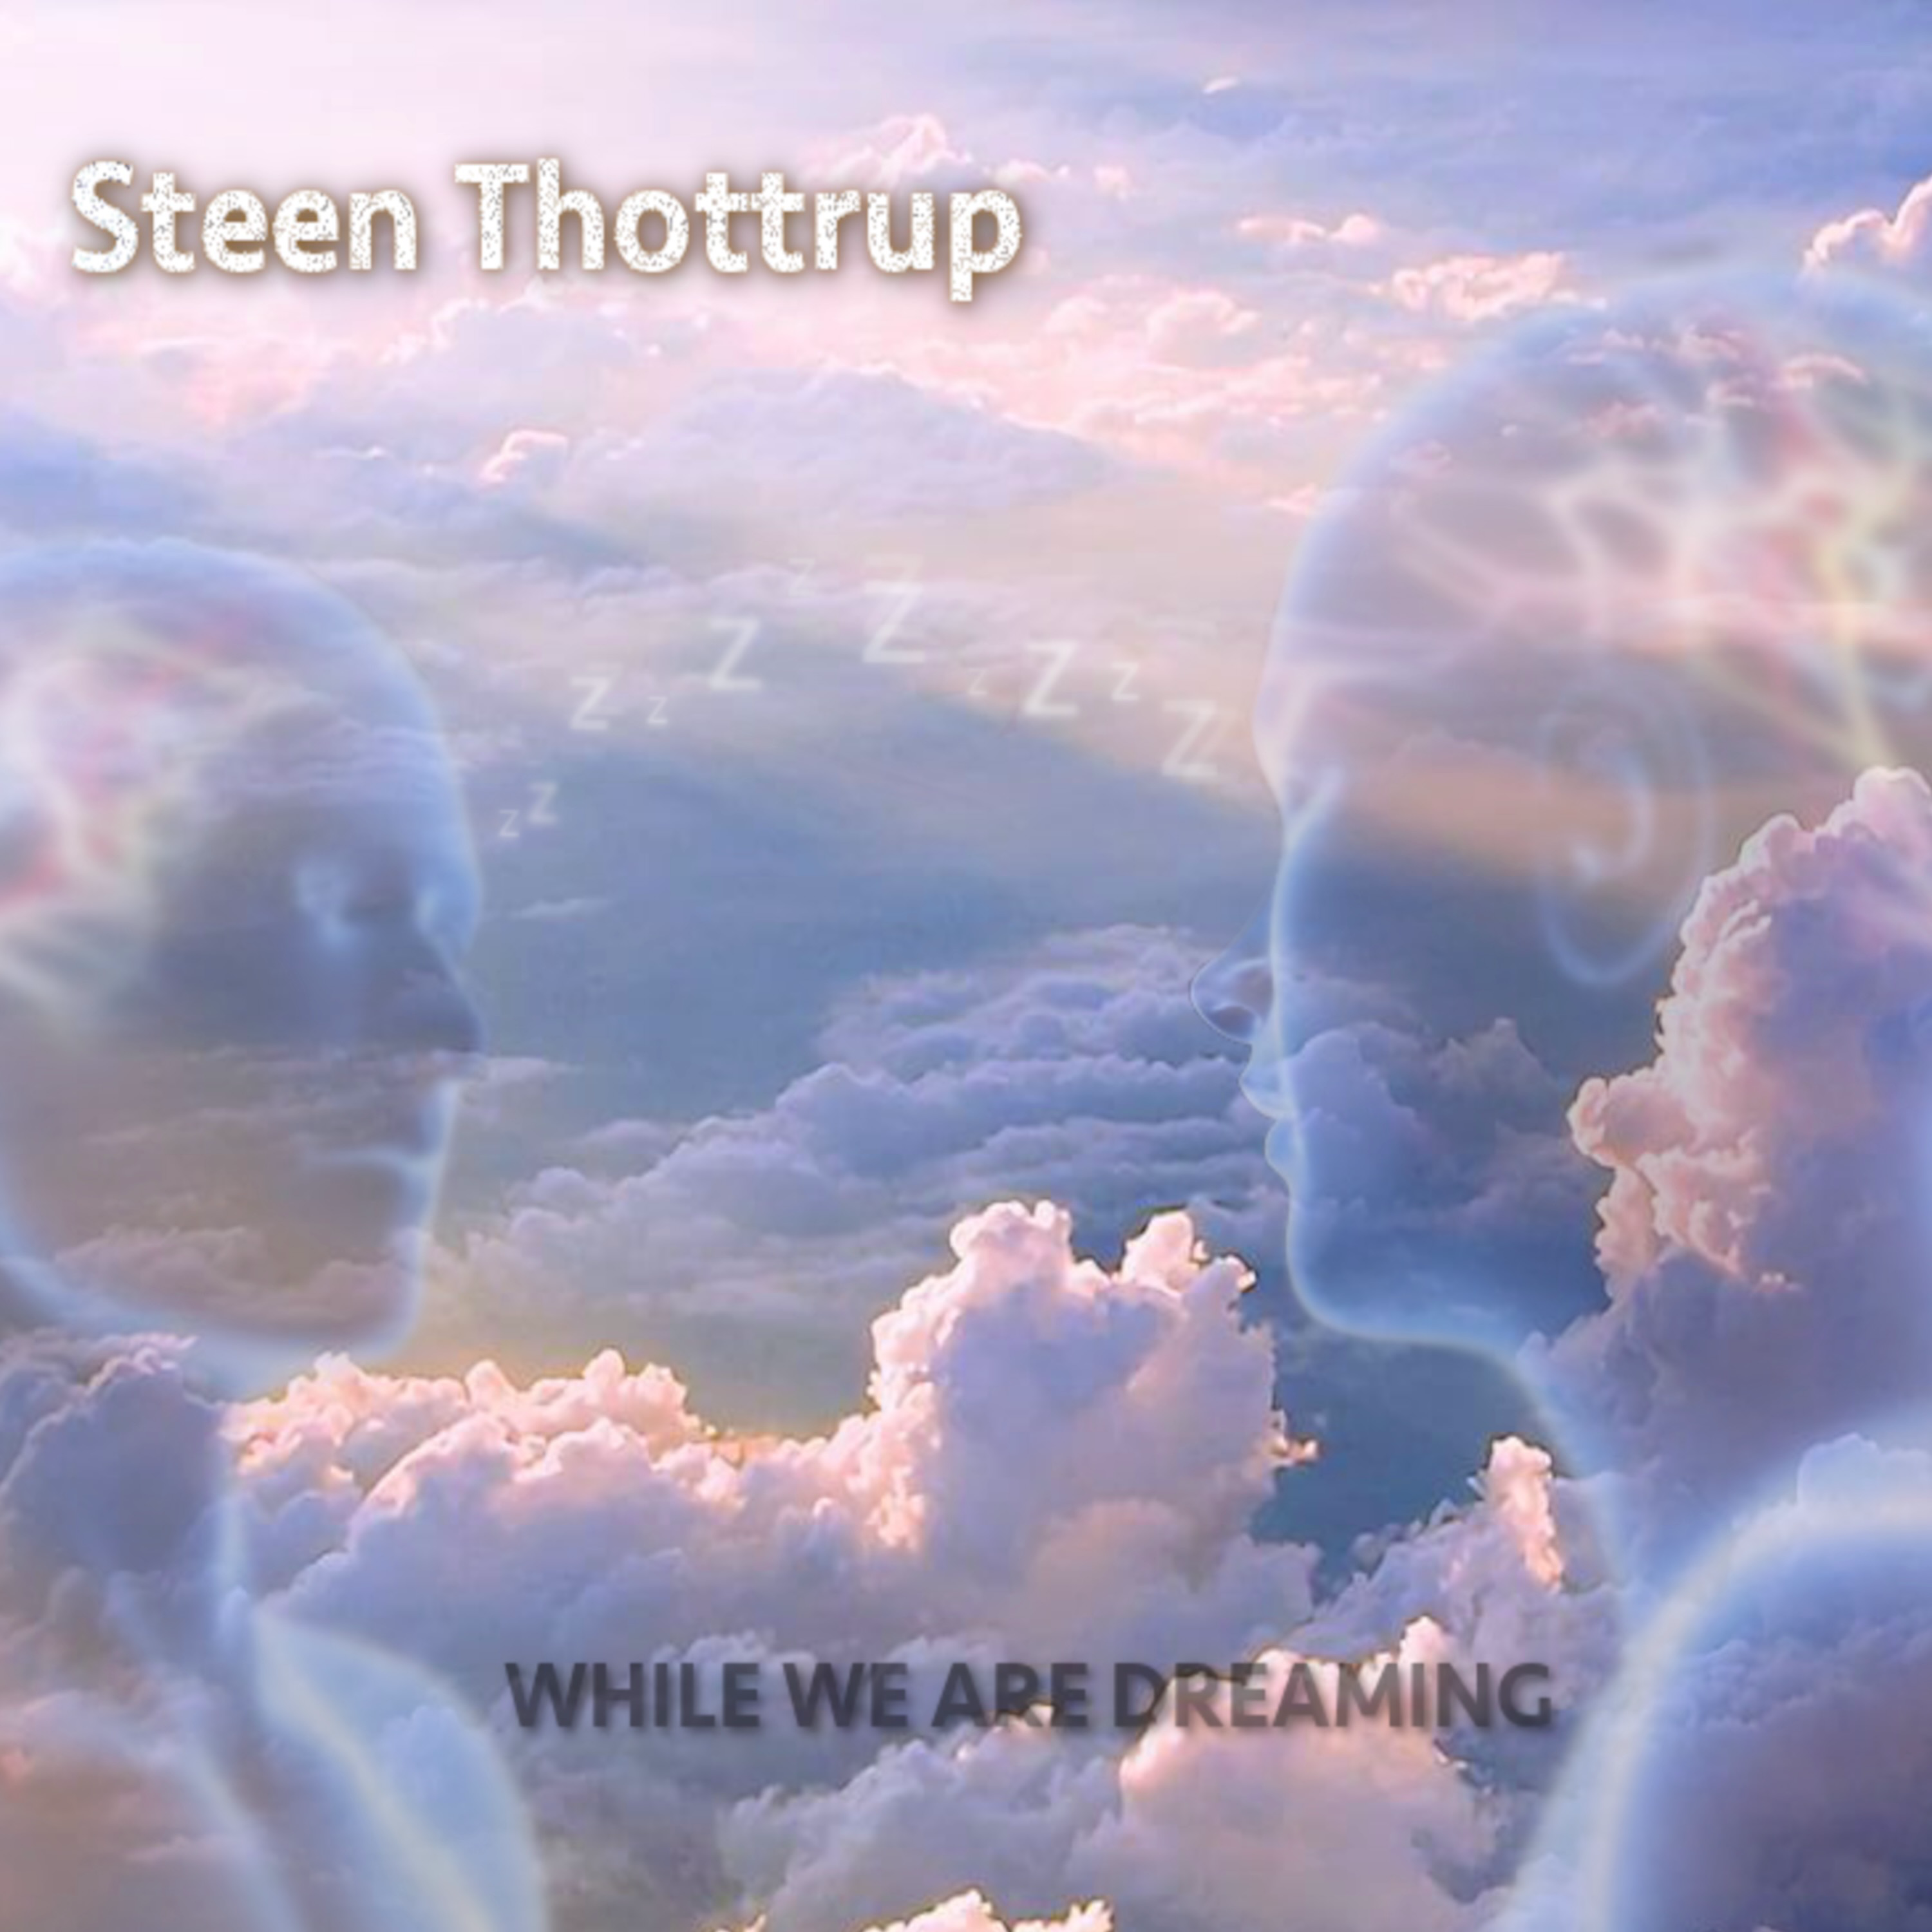 Steen Thottrup - While We Are Dreaming (Instrumental)